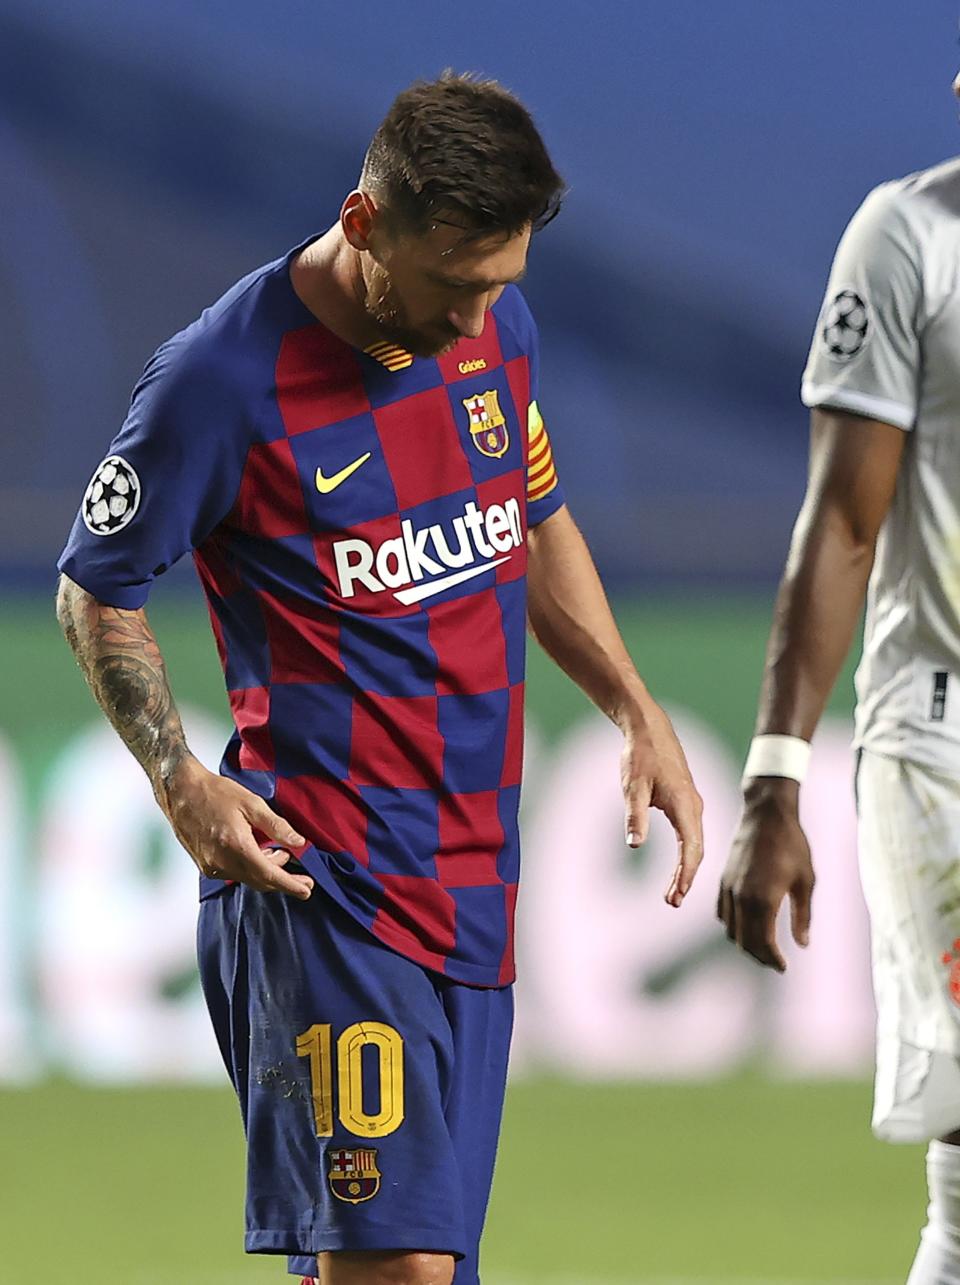 Barcelona's Lionel Messi leaves the pitch at half time during the Champions League quarterfinal soccer match between Barcelona and Bayern Munich in Lisbon, Portugal, Friday, Aug. 14, 2020. (Rafael Marchante/Pool via AP)